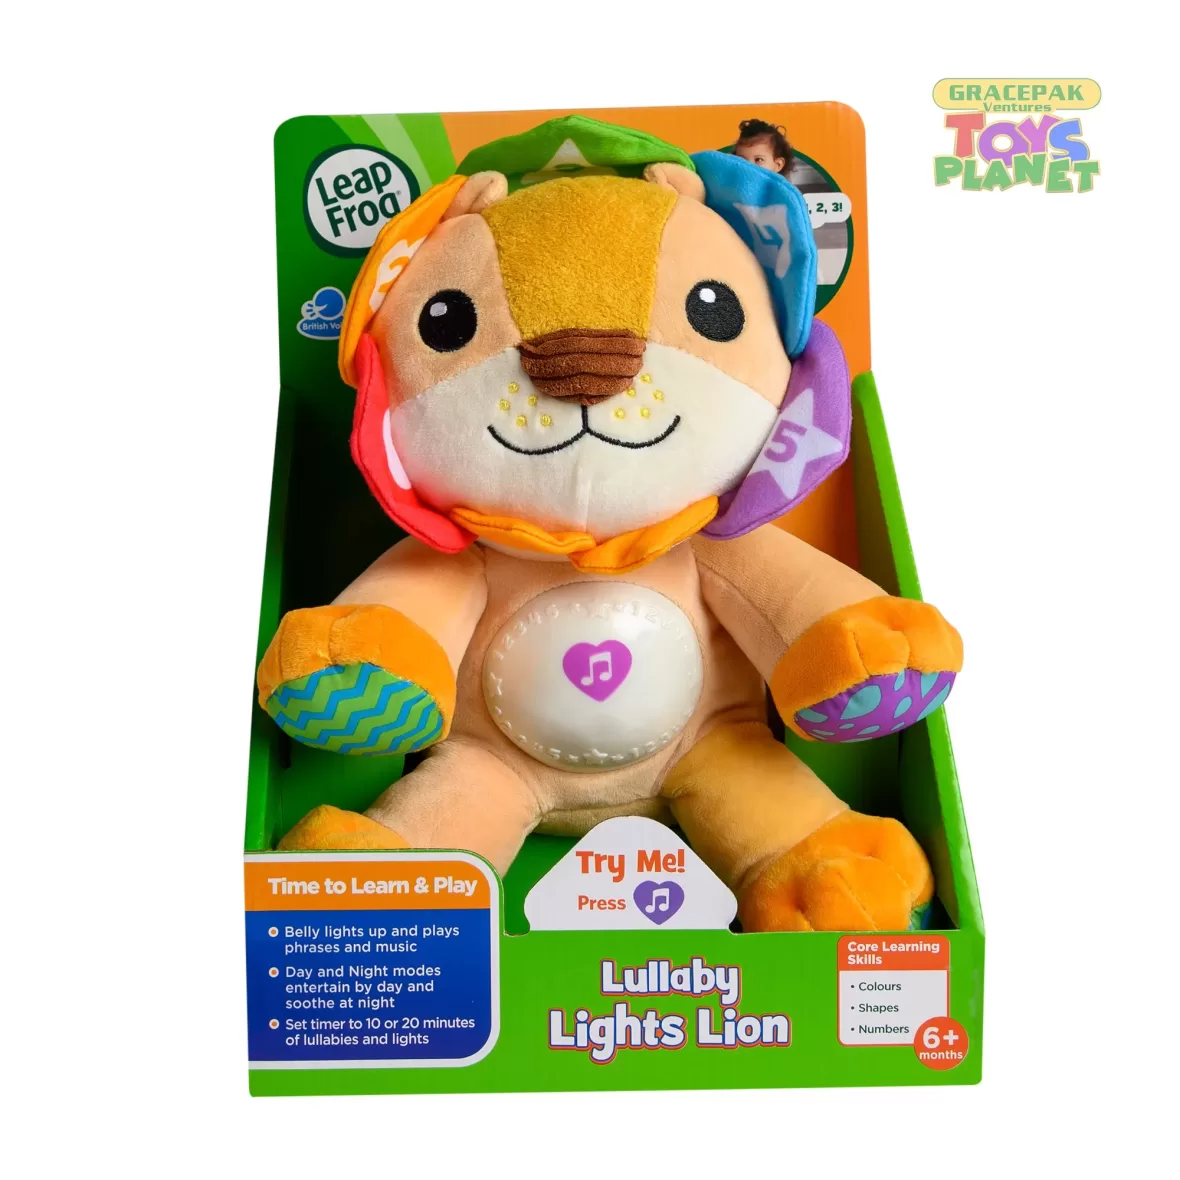 Lullaby Lights Lion